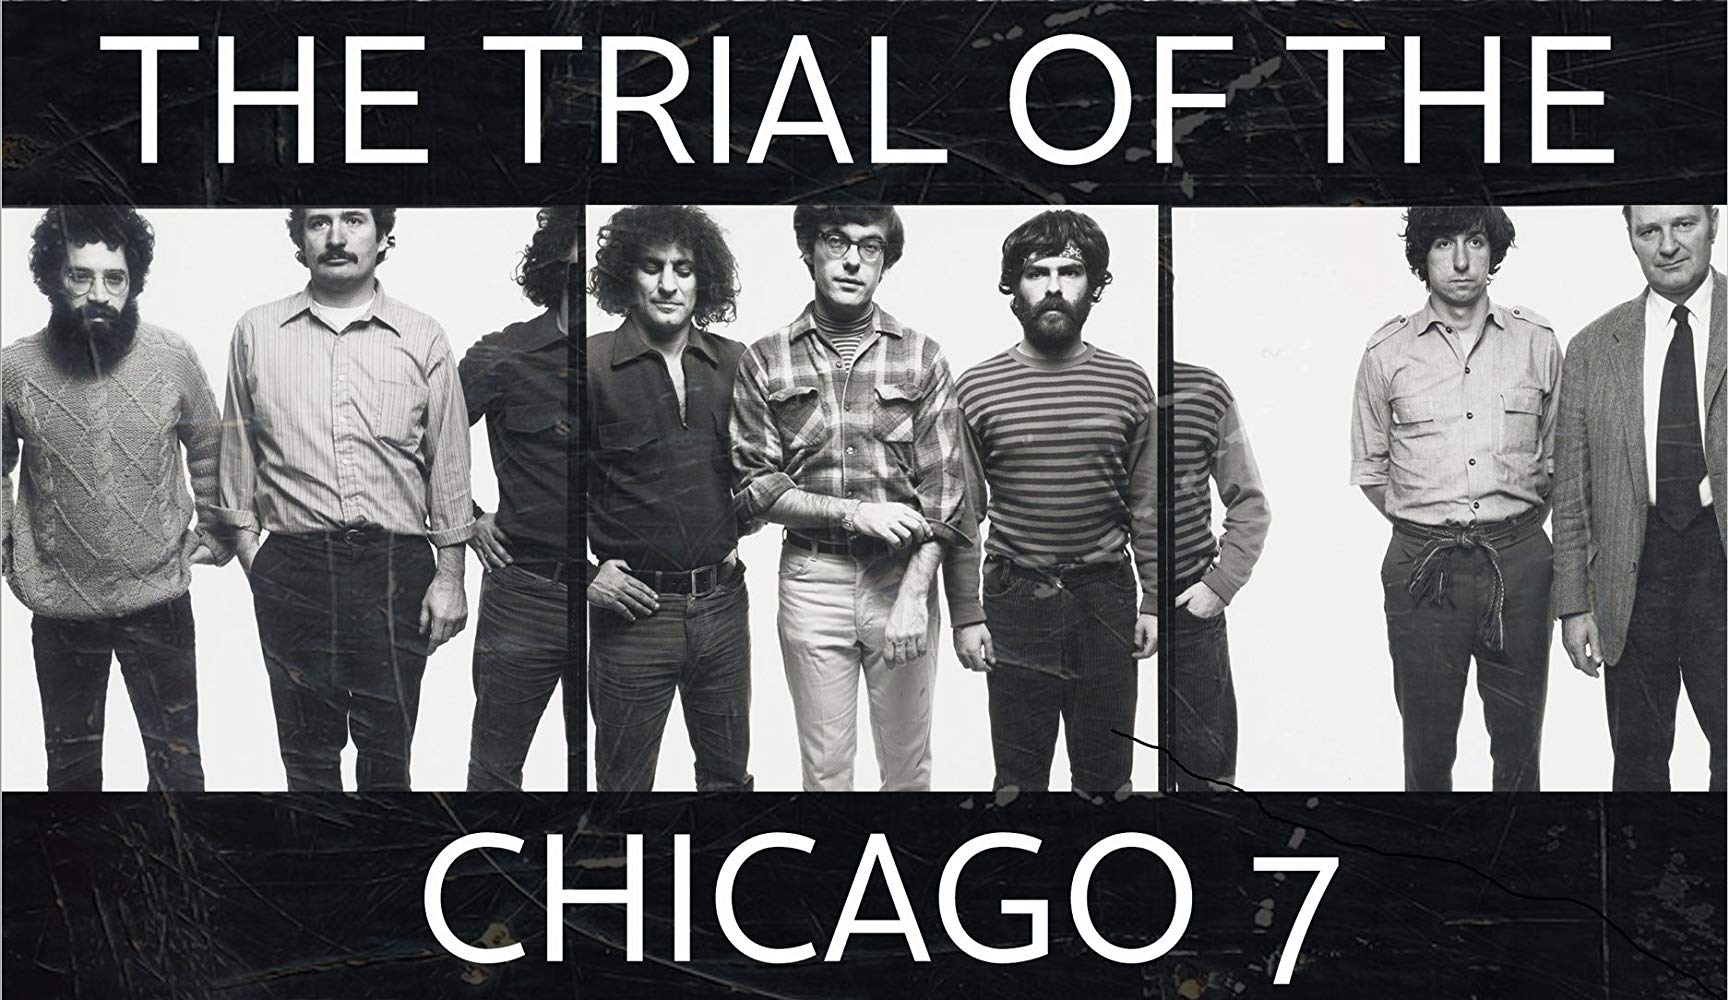 'The Trial of the Chicago 7'